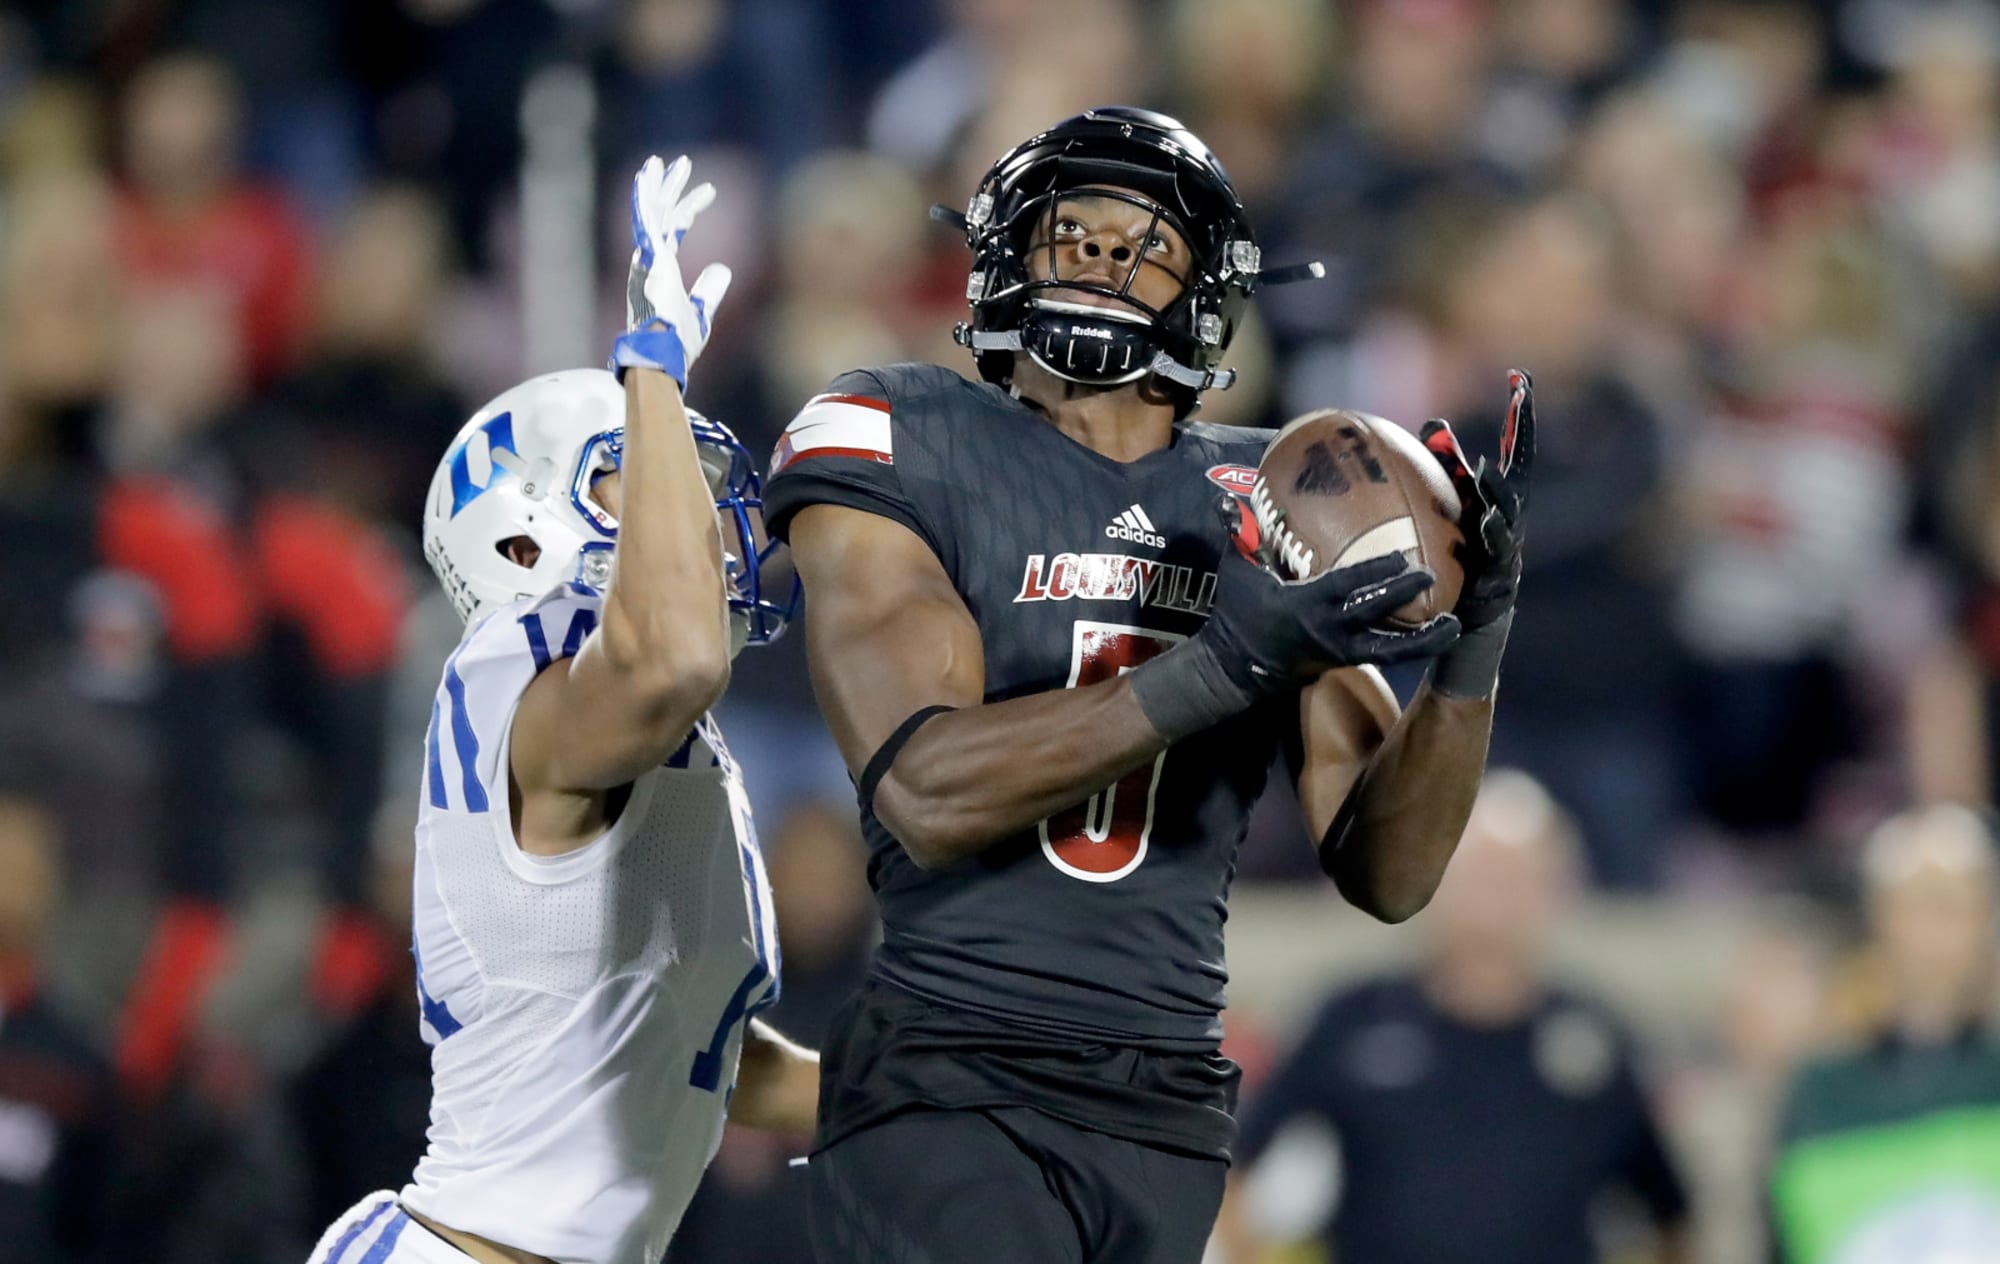 Louisville Football Five Things to Watch vs Indiana State